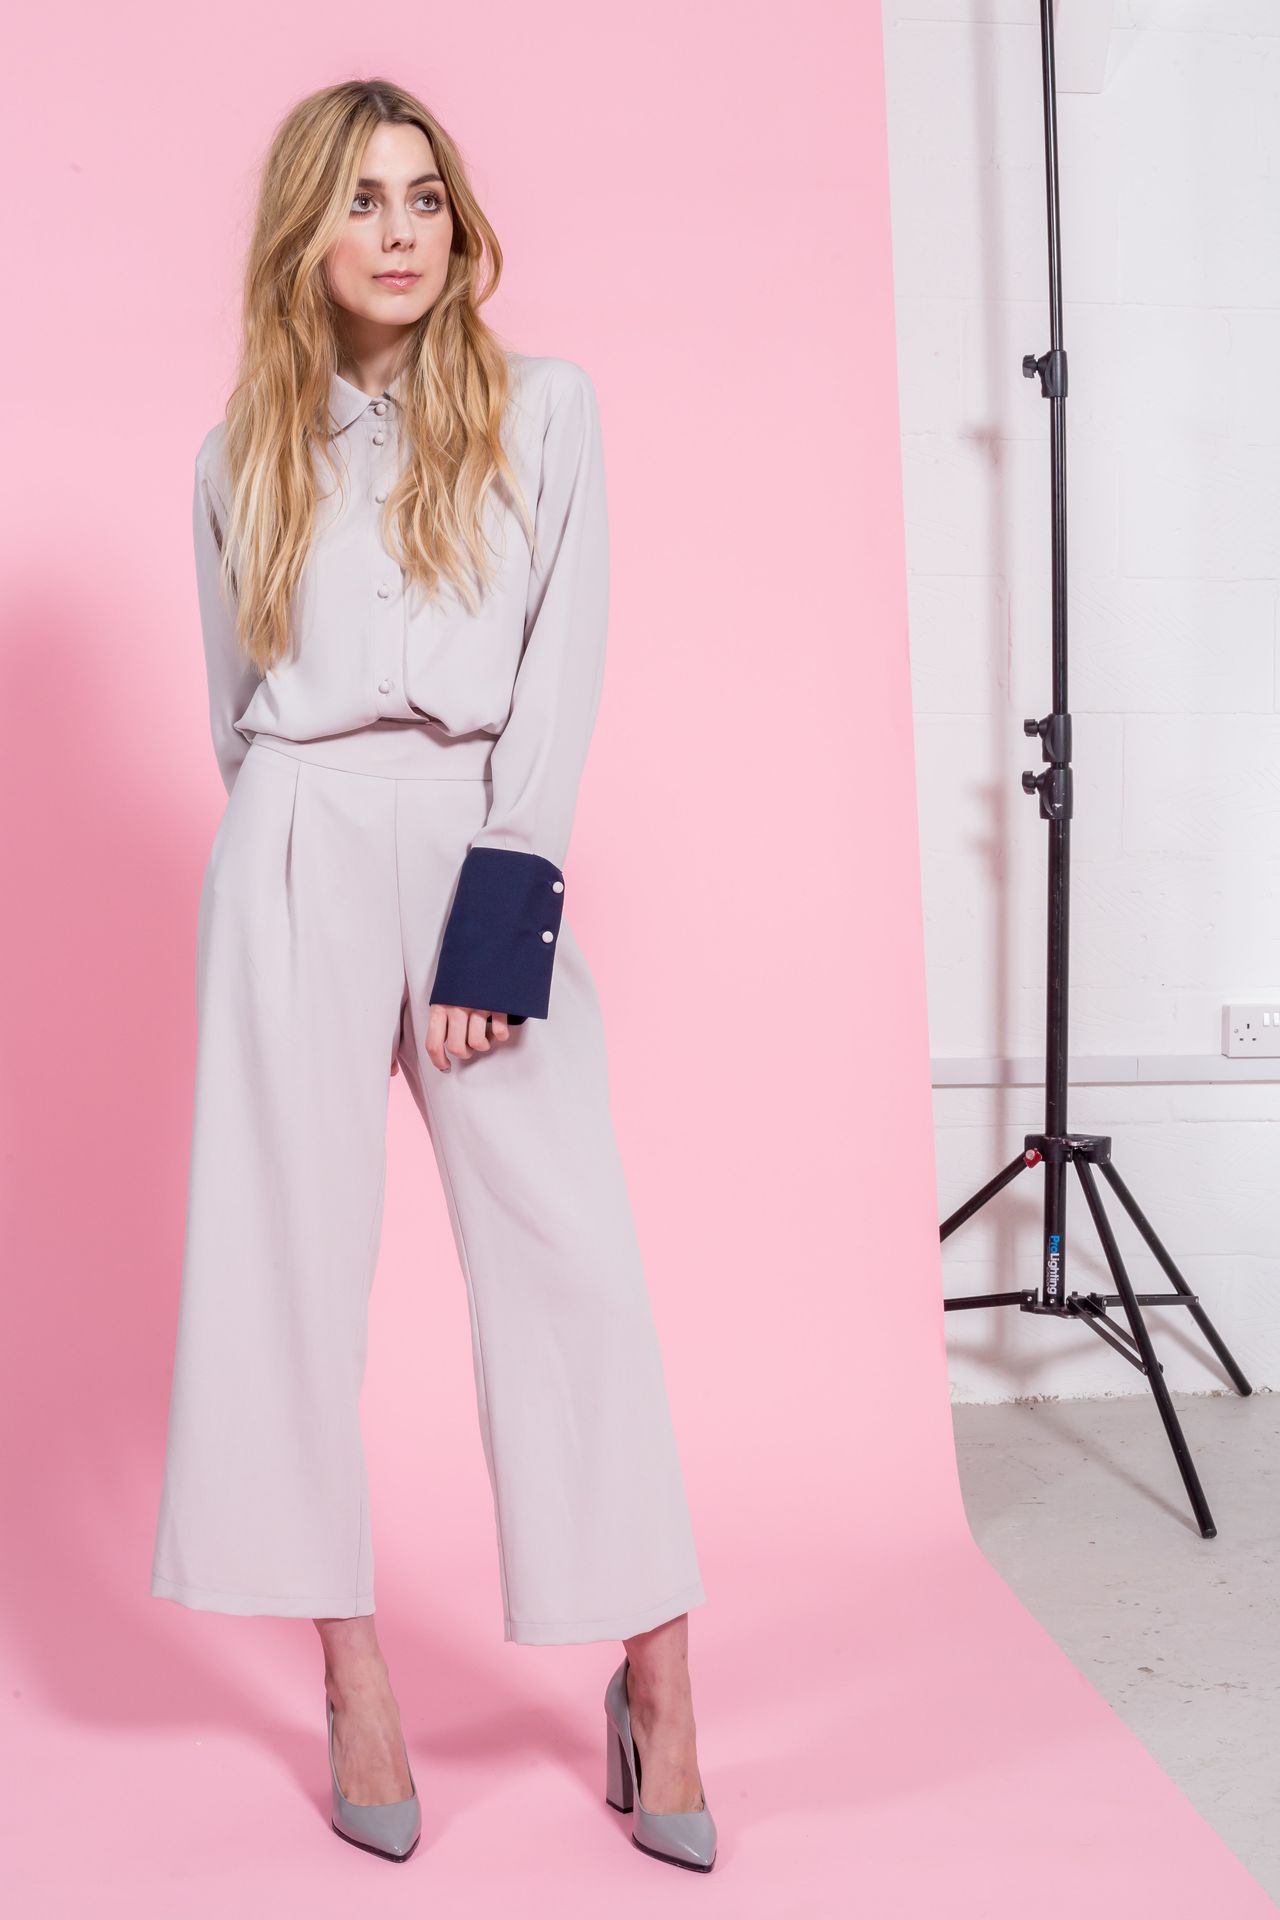 A jumpsuit from Alter London's latest lookbook